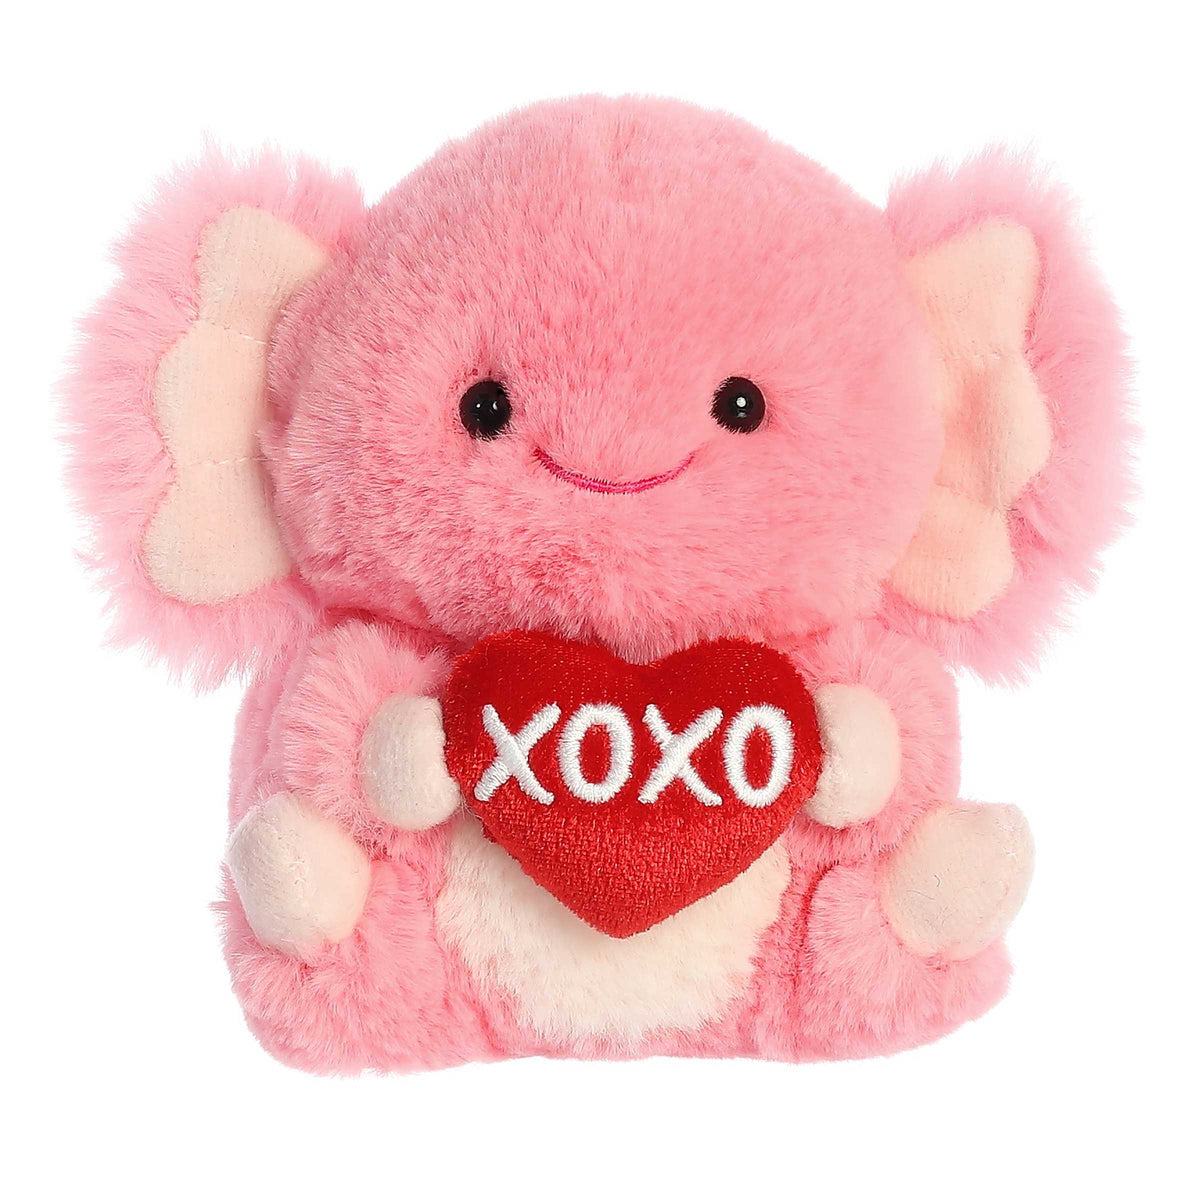 Adorable pink Axolotl plush from Rolly Pets, holding a ‘XOXO’ heart, ready for cuddles and Valentine's Day